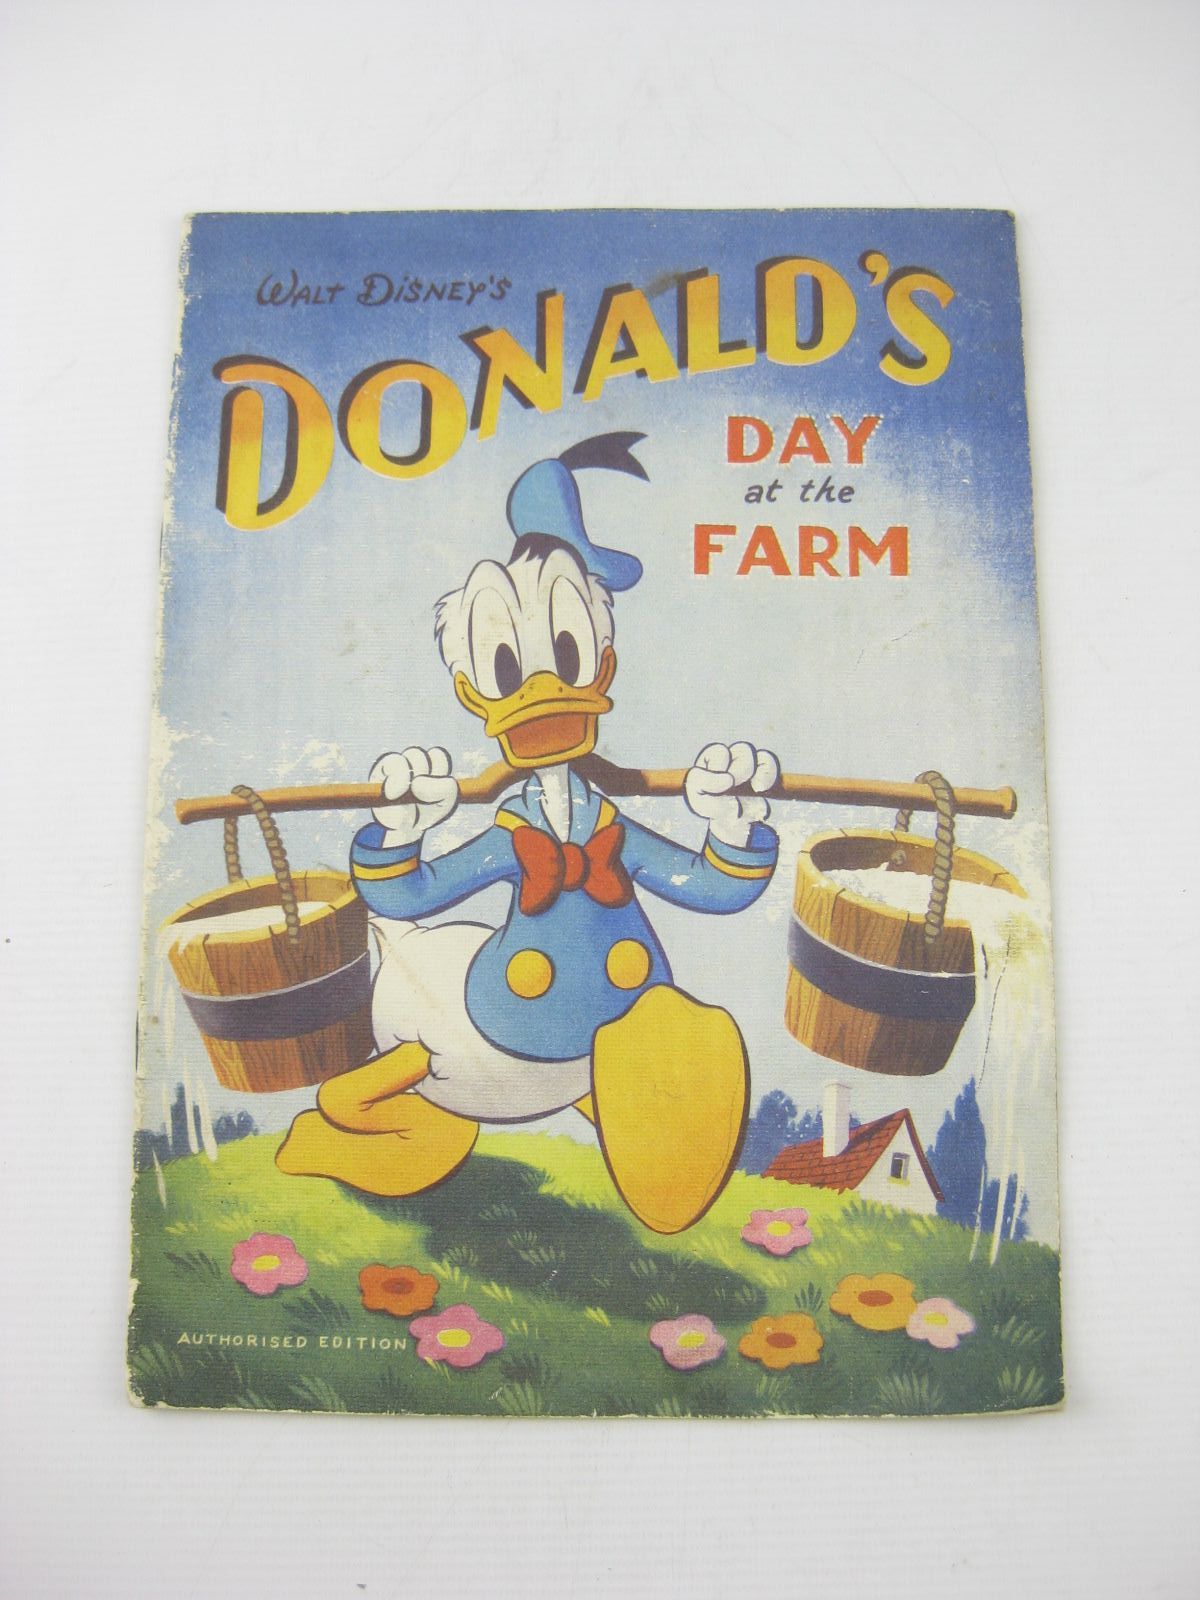 Photo of WALT DISNEY'S DONALD'S DAY AT THE FARM written by Disney, Walt published by Birn Brothers Ltd. (STOCK CODE: 1402338)  for sale by Stella & Rose's Books